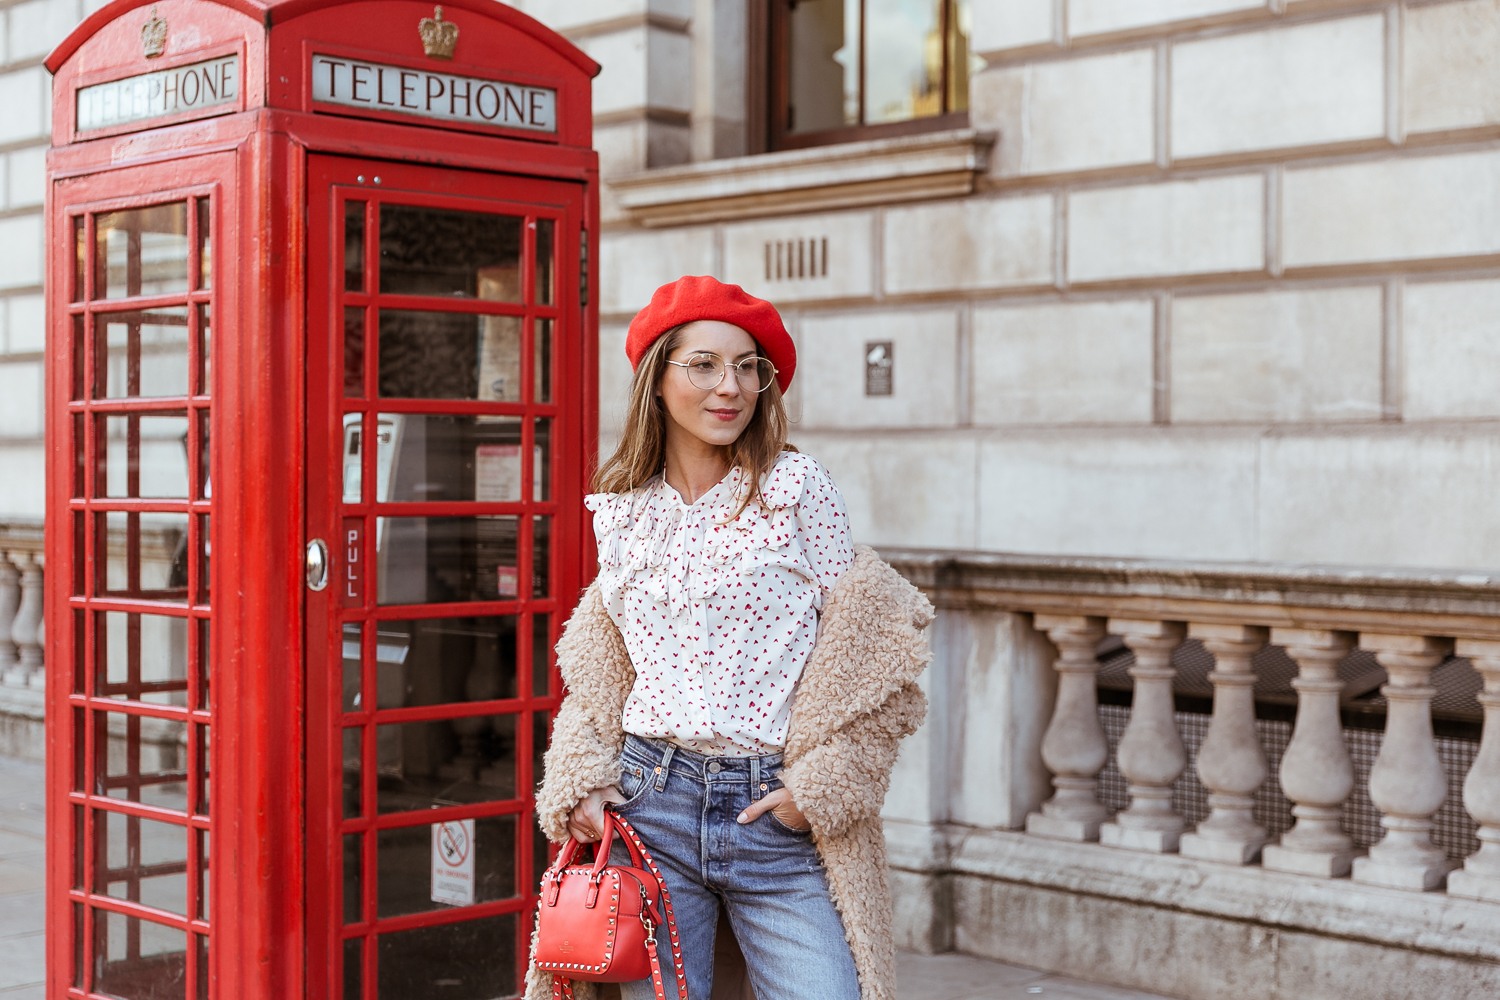 teddy coat levis 501 jeans red hat steffen schraut blouse hearts red valentino bag outfit street style london white boots veja du street style